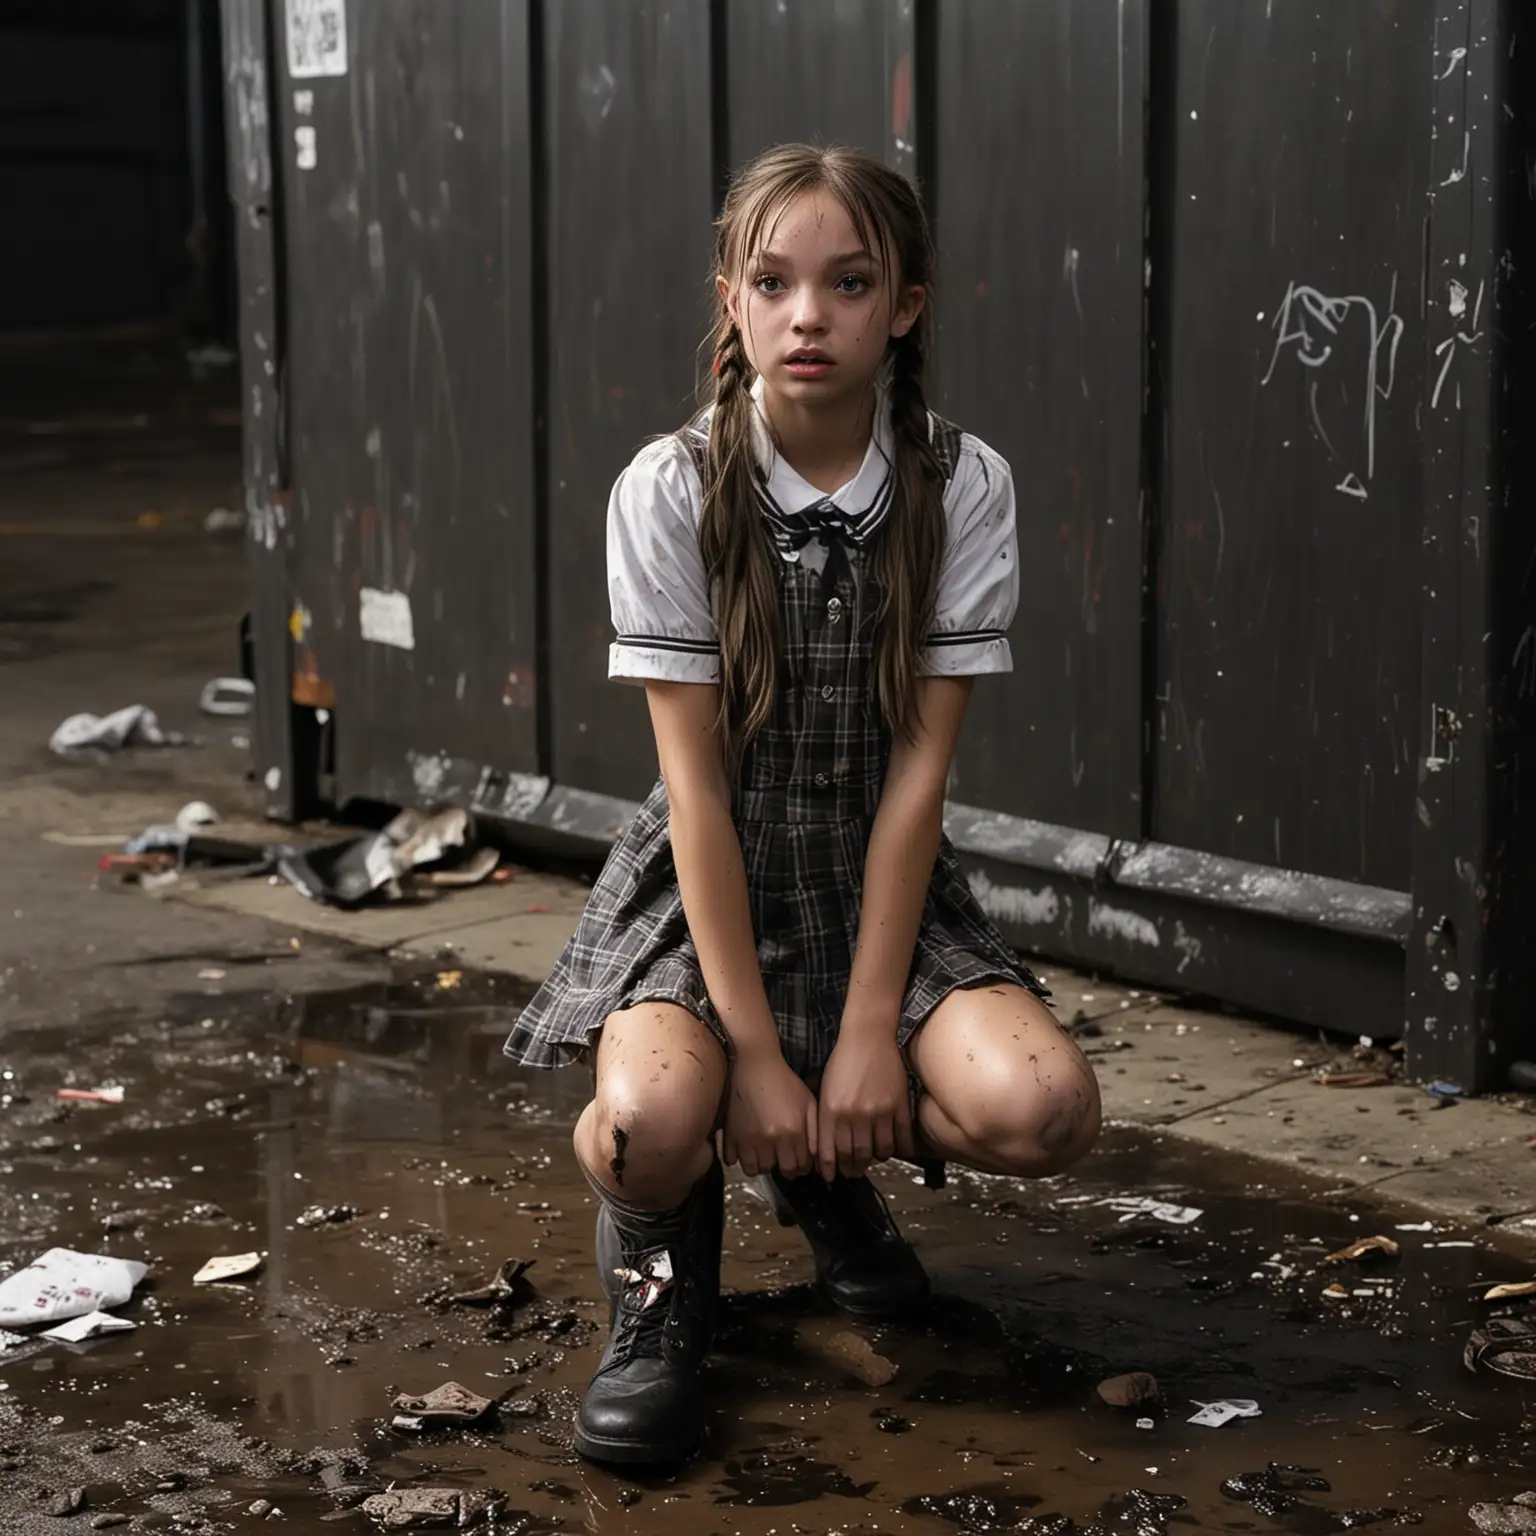 photorealistic, young maddie ziegler, dressed as a schoolgirl, pigtails, on her knees in front a dumpster, dark, night, muddy, trash, dirty, wet, stained, grim, graffitti
